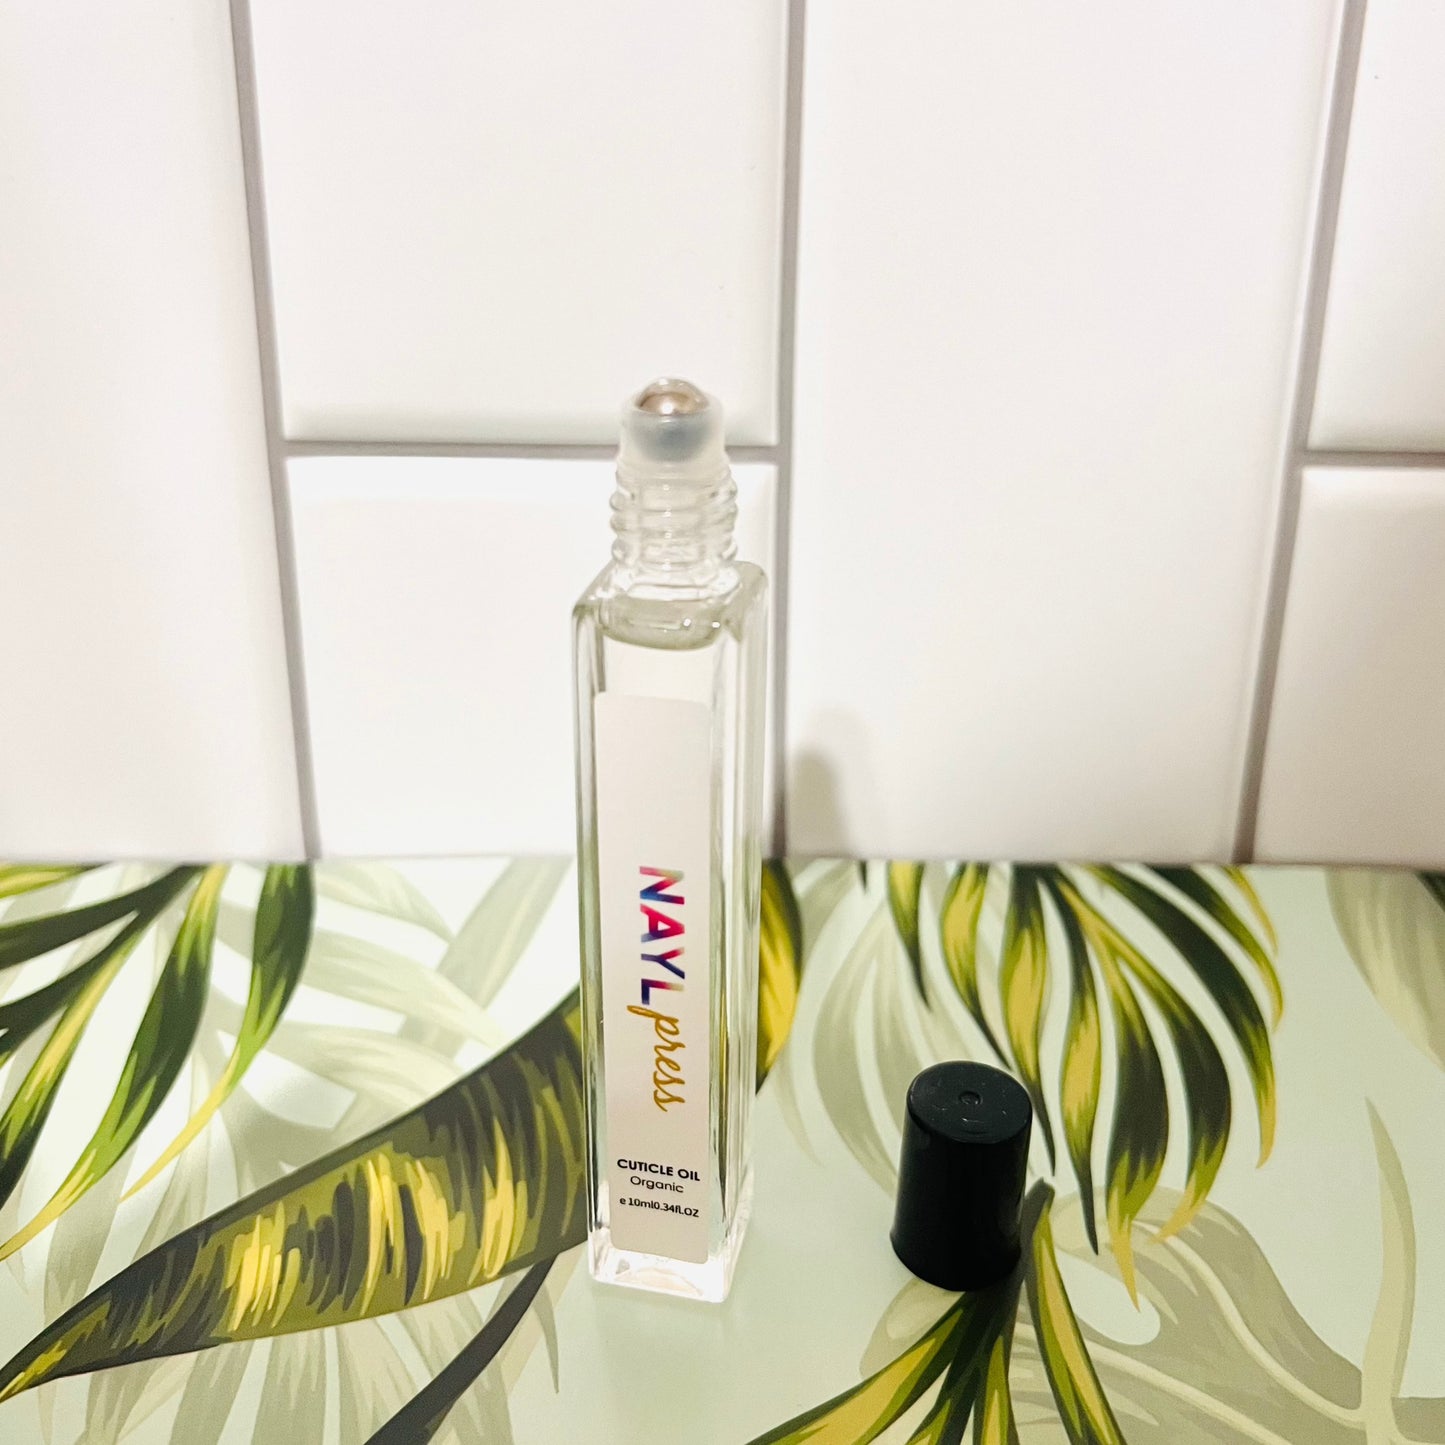 "A Little Lily Love" Cuticle Oil